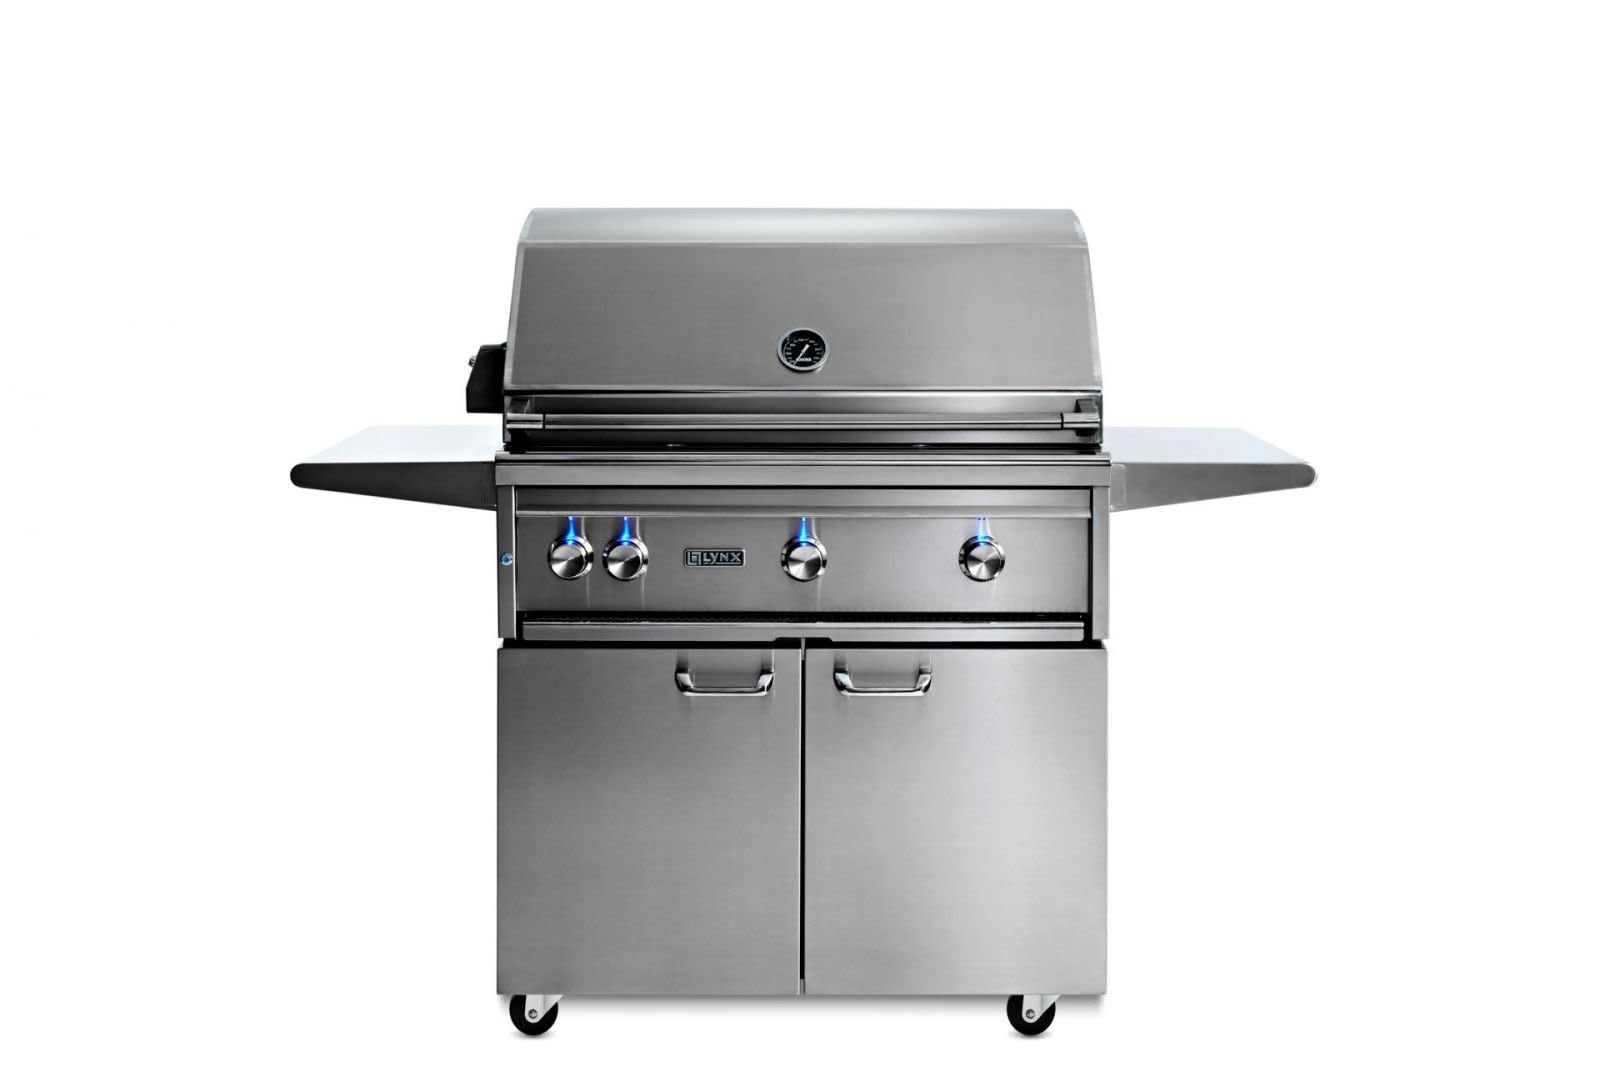 36" Freestanding All Trident™ Grill w/ Flametrak and Rotisserie